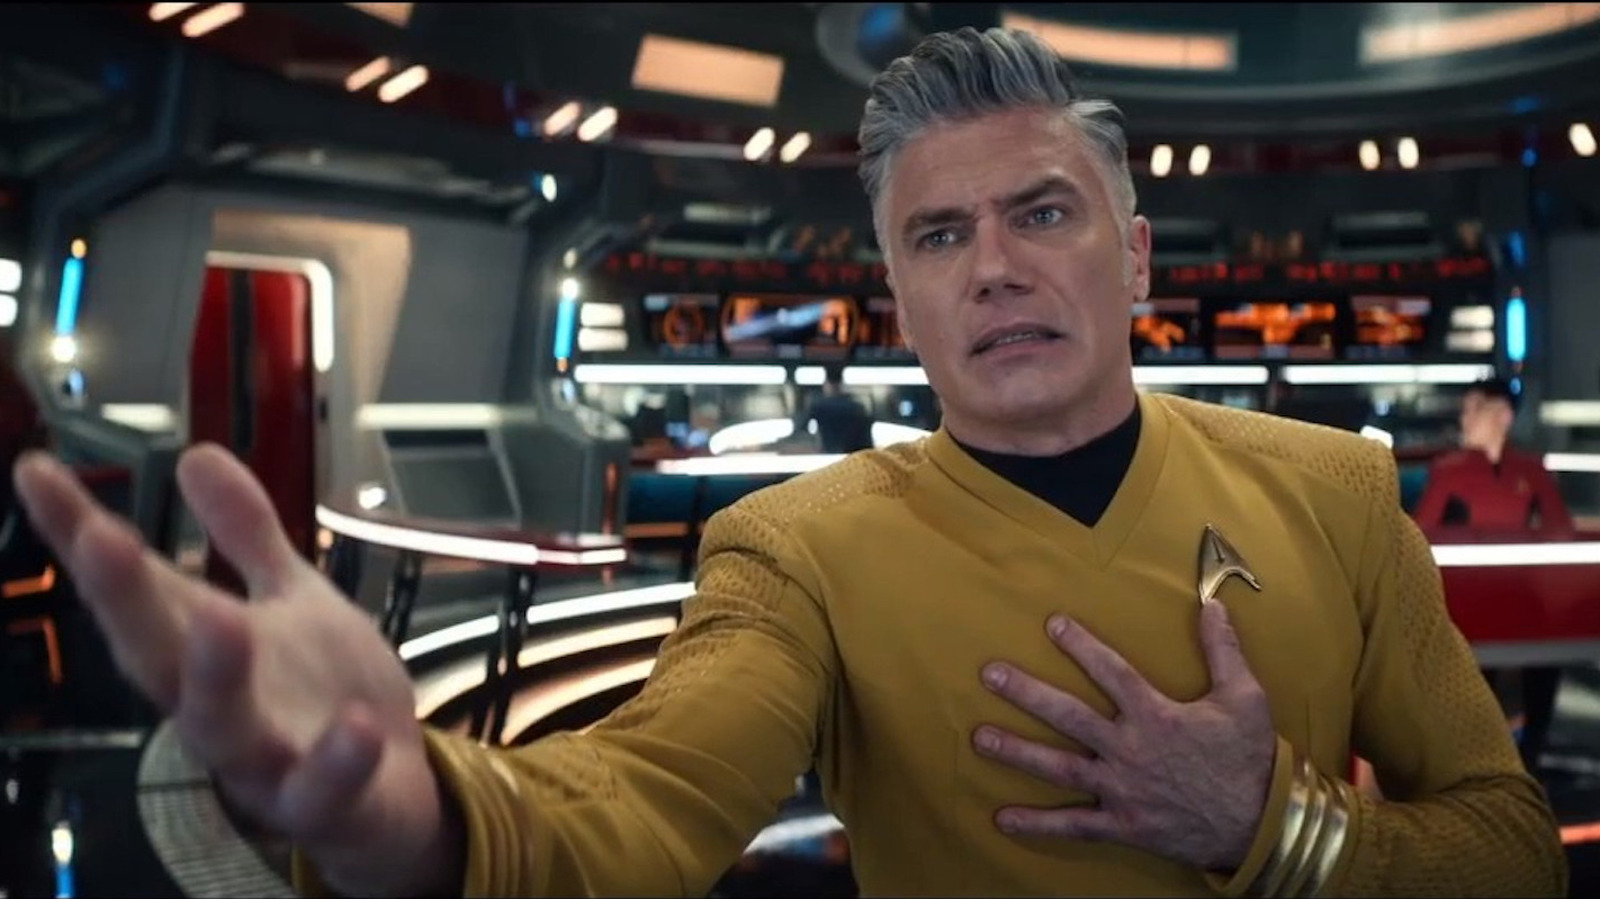 Star Trek's Anson Mount Put A Little Shatner Into His Subspace Rhapsody Performance [Exclusive]